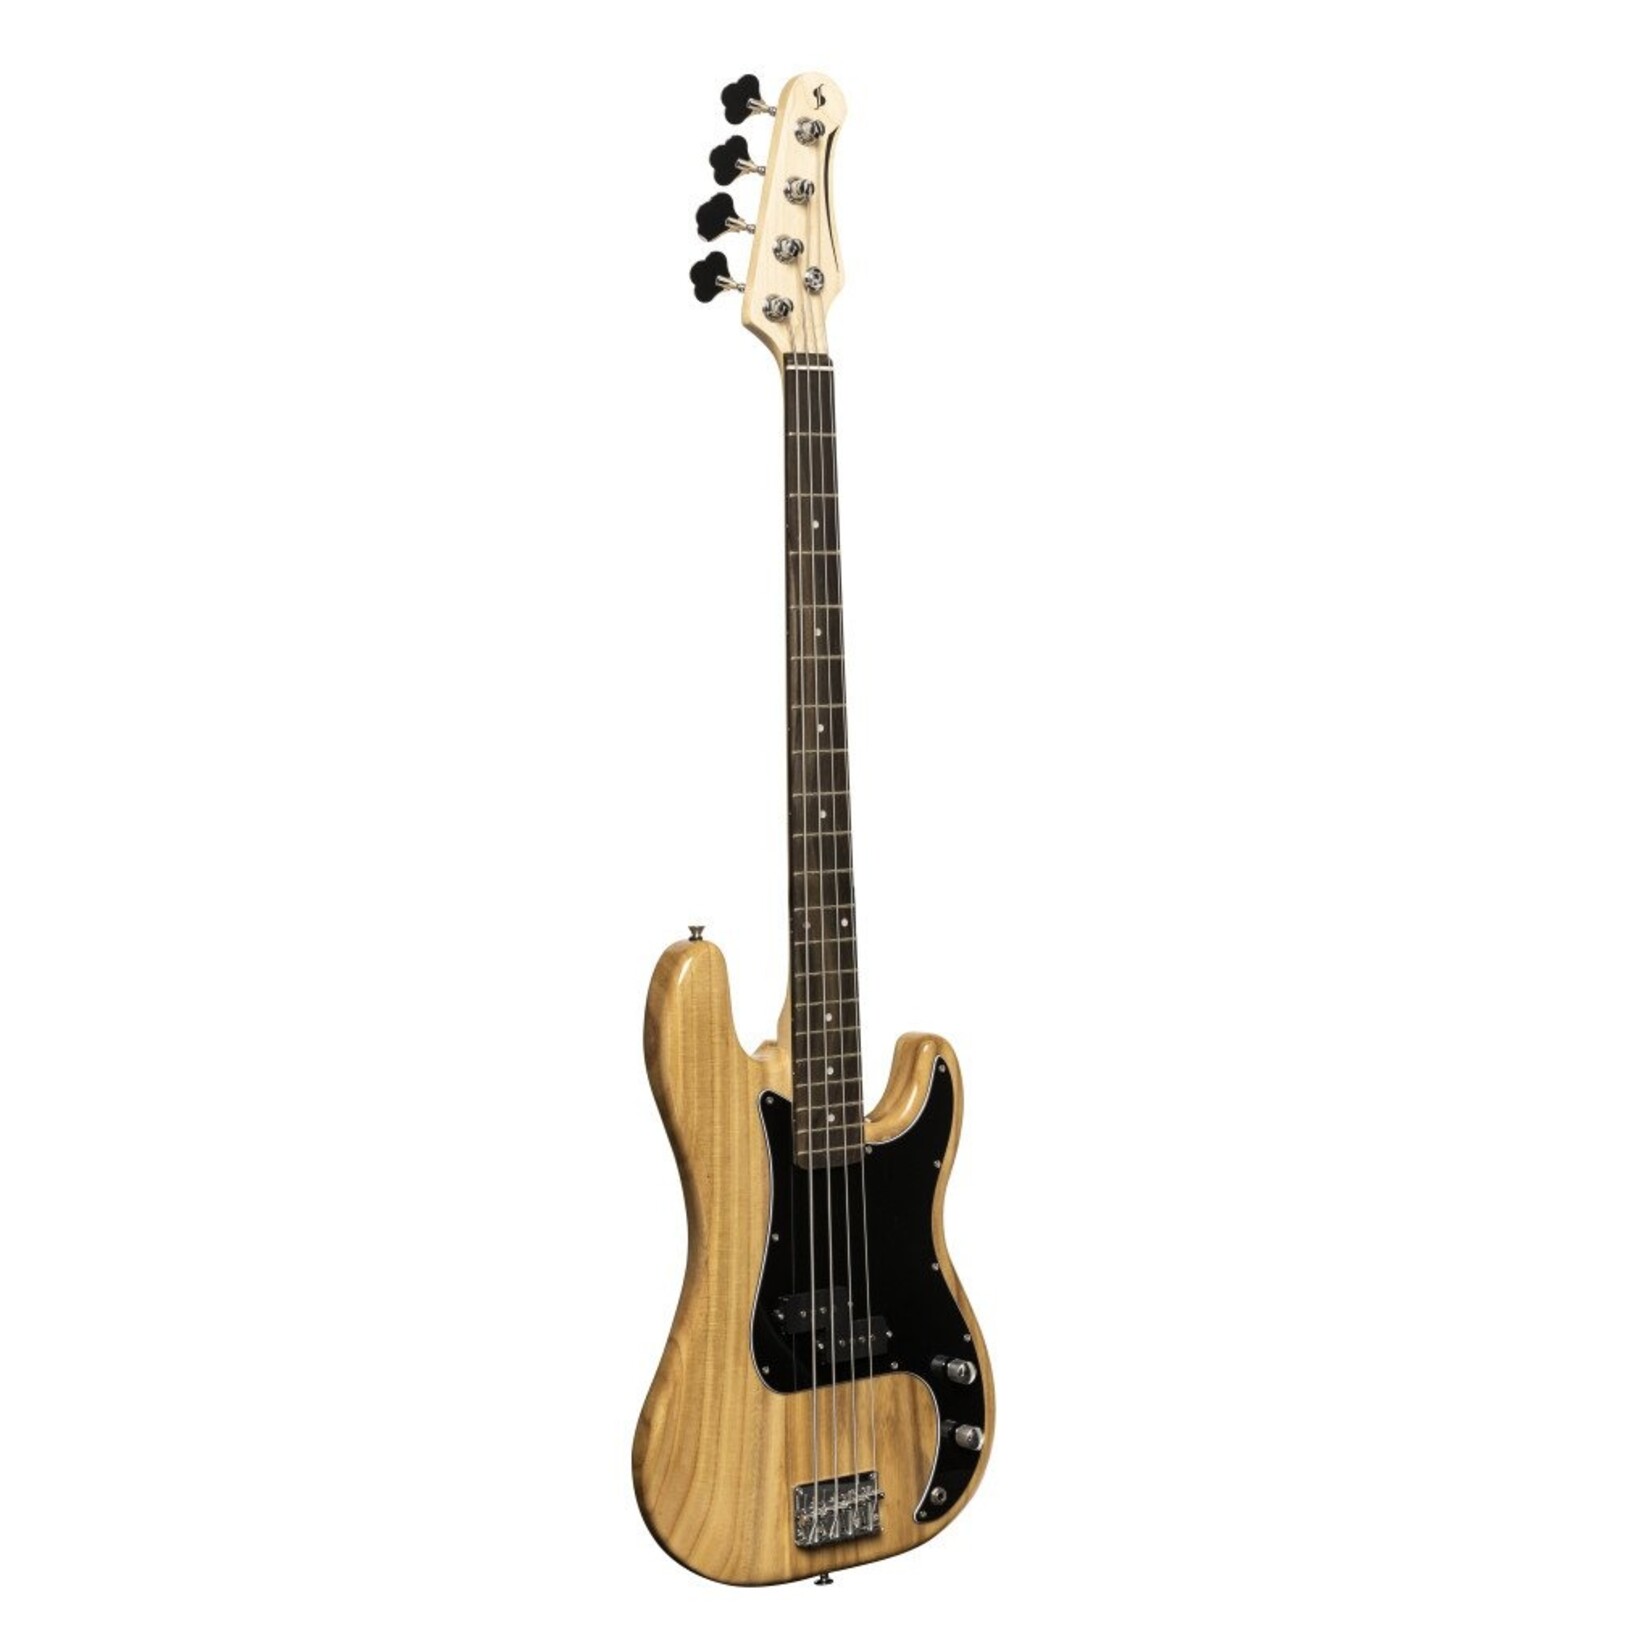 Stagg SBP-30 Standard "P" 4-String Electric Bass Guitar - Natural